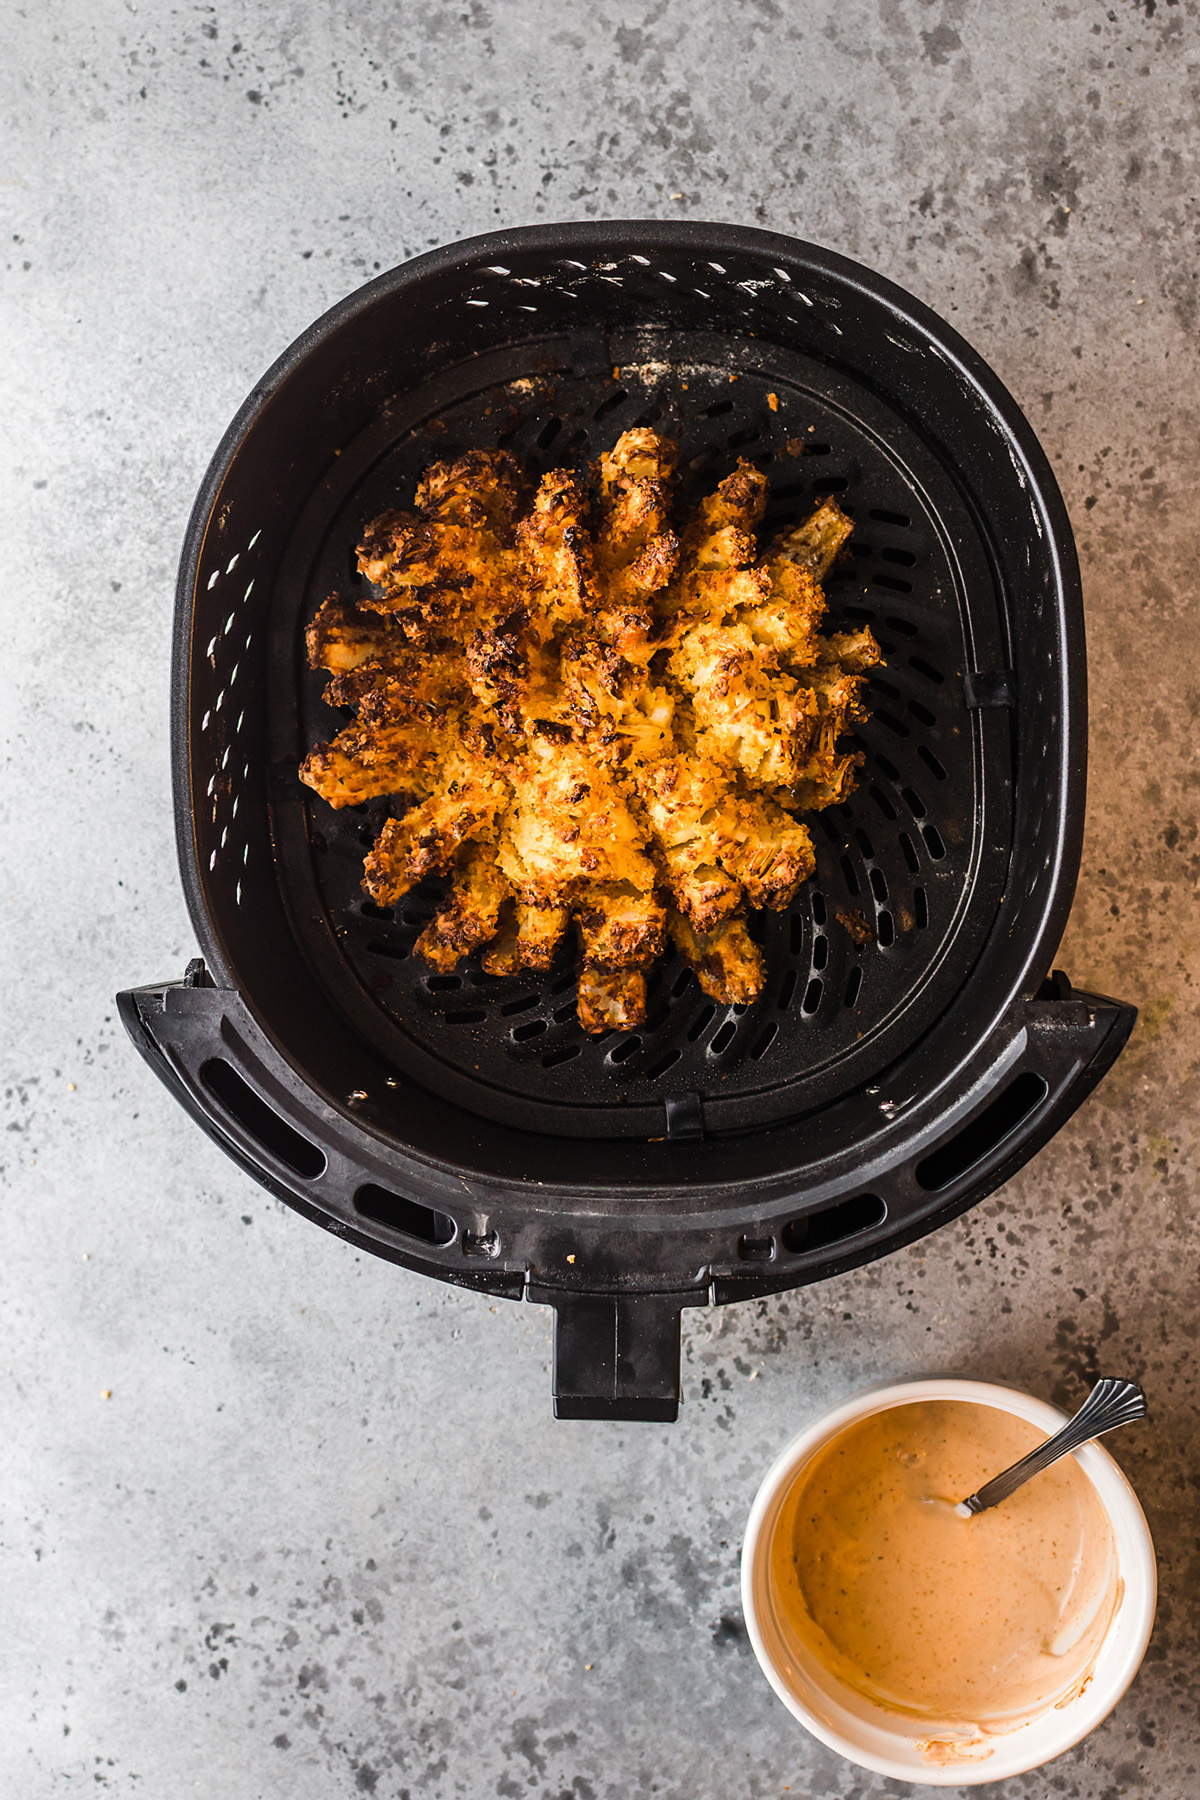 Overhead view of a blooming onion in an air fryer basket